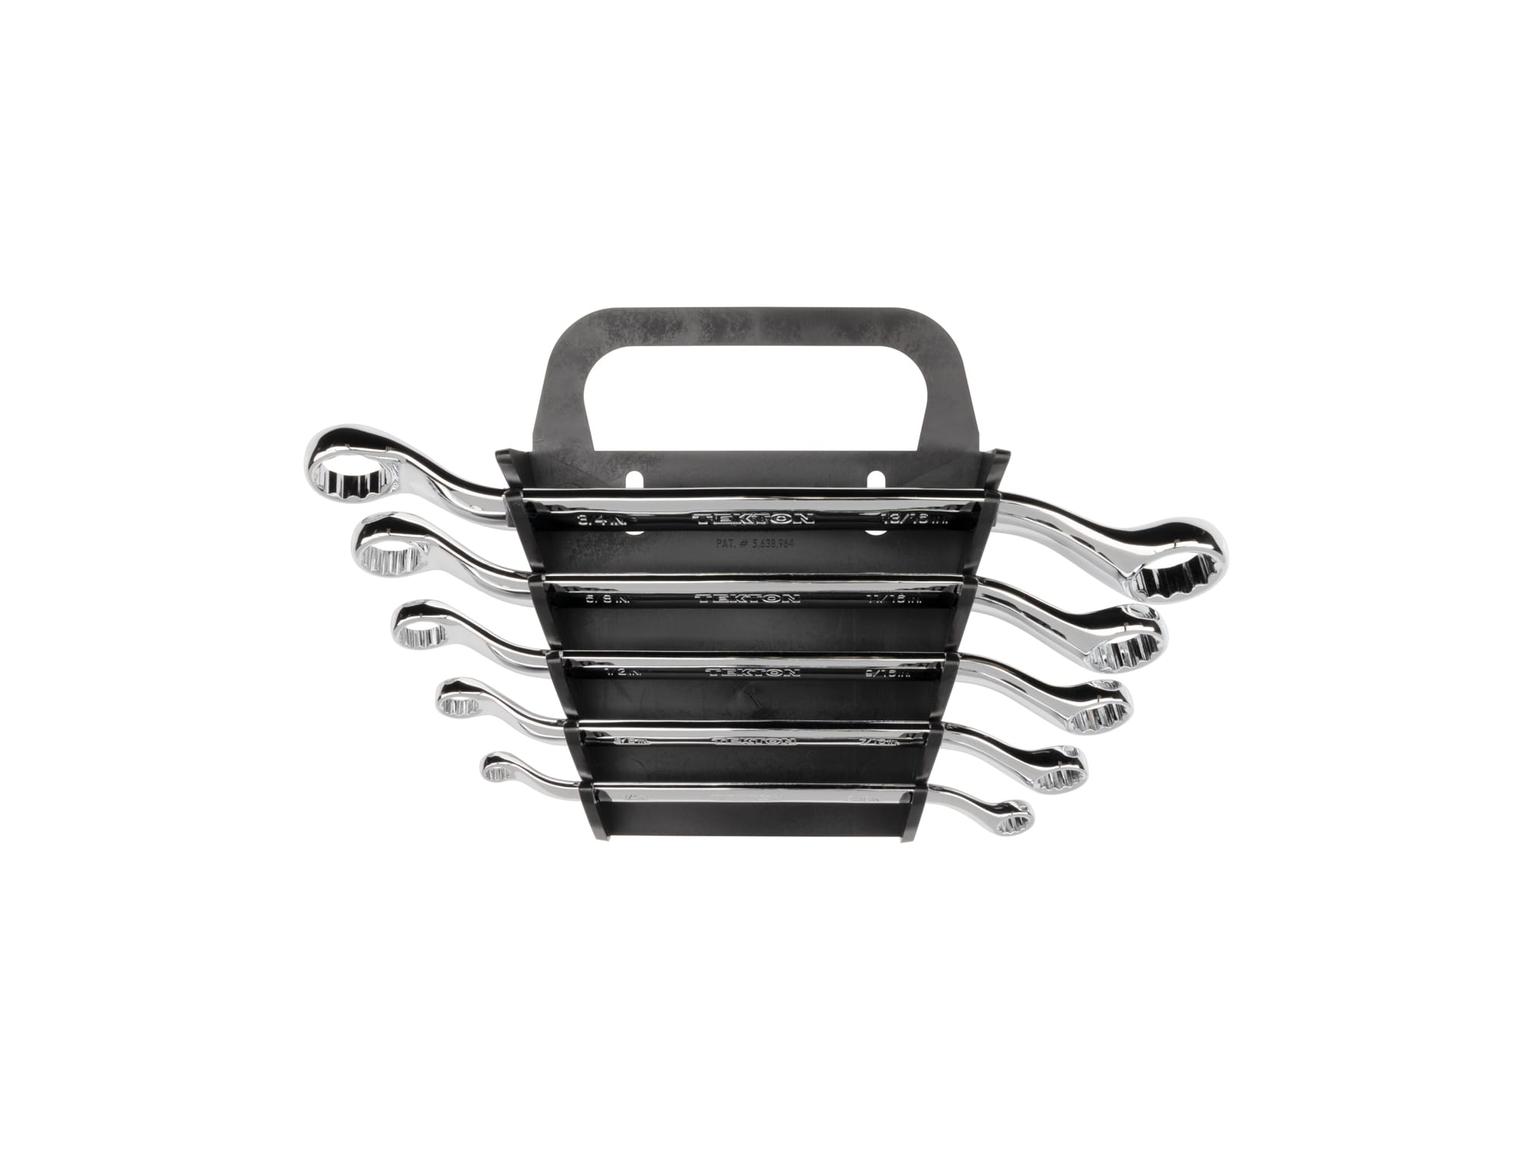 45-Degree Offset Box End Wrench Set, 5-Piece (Holder)